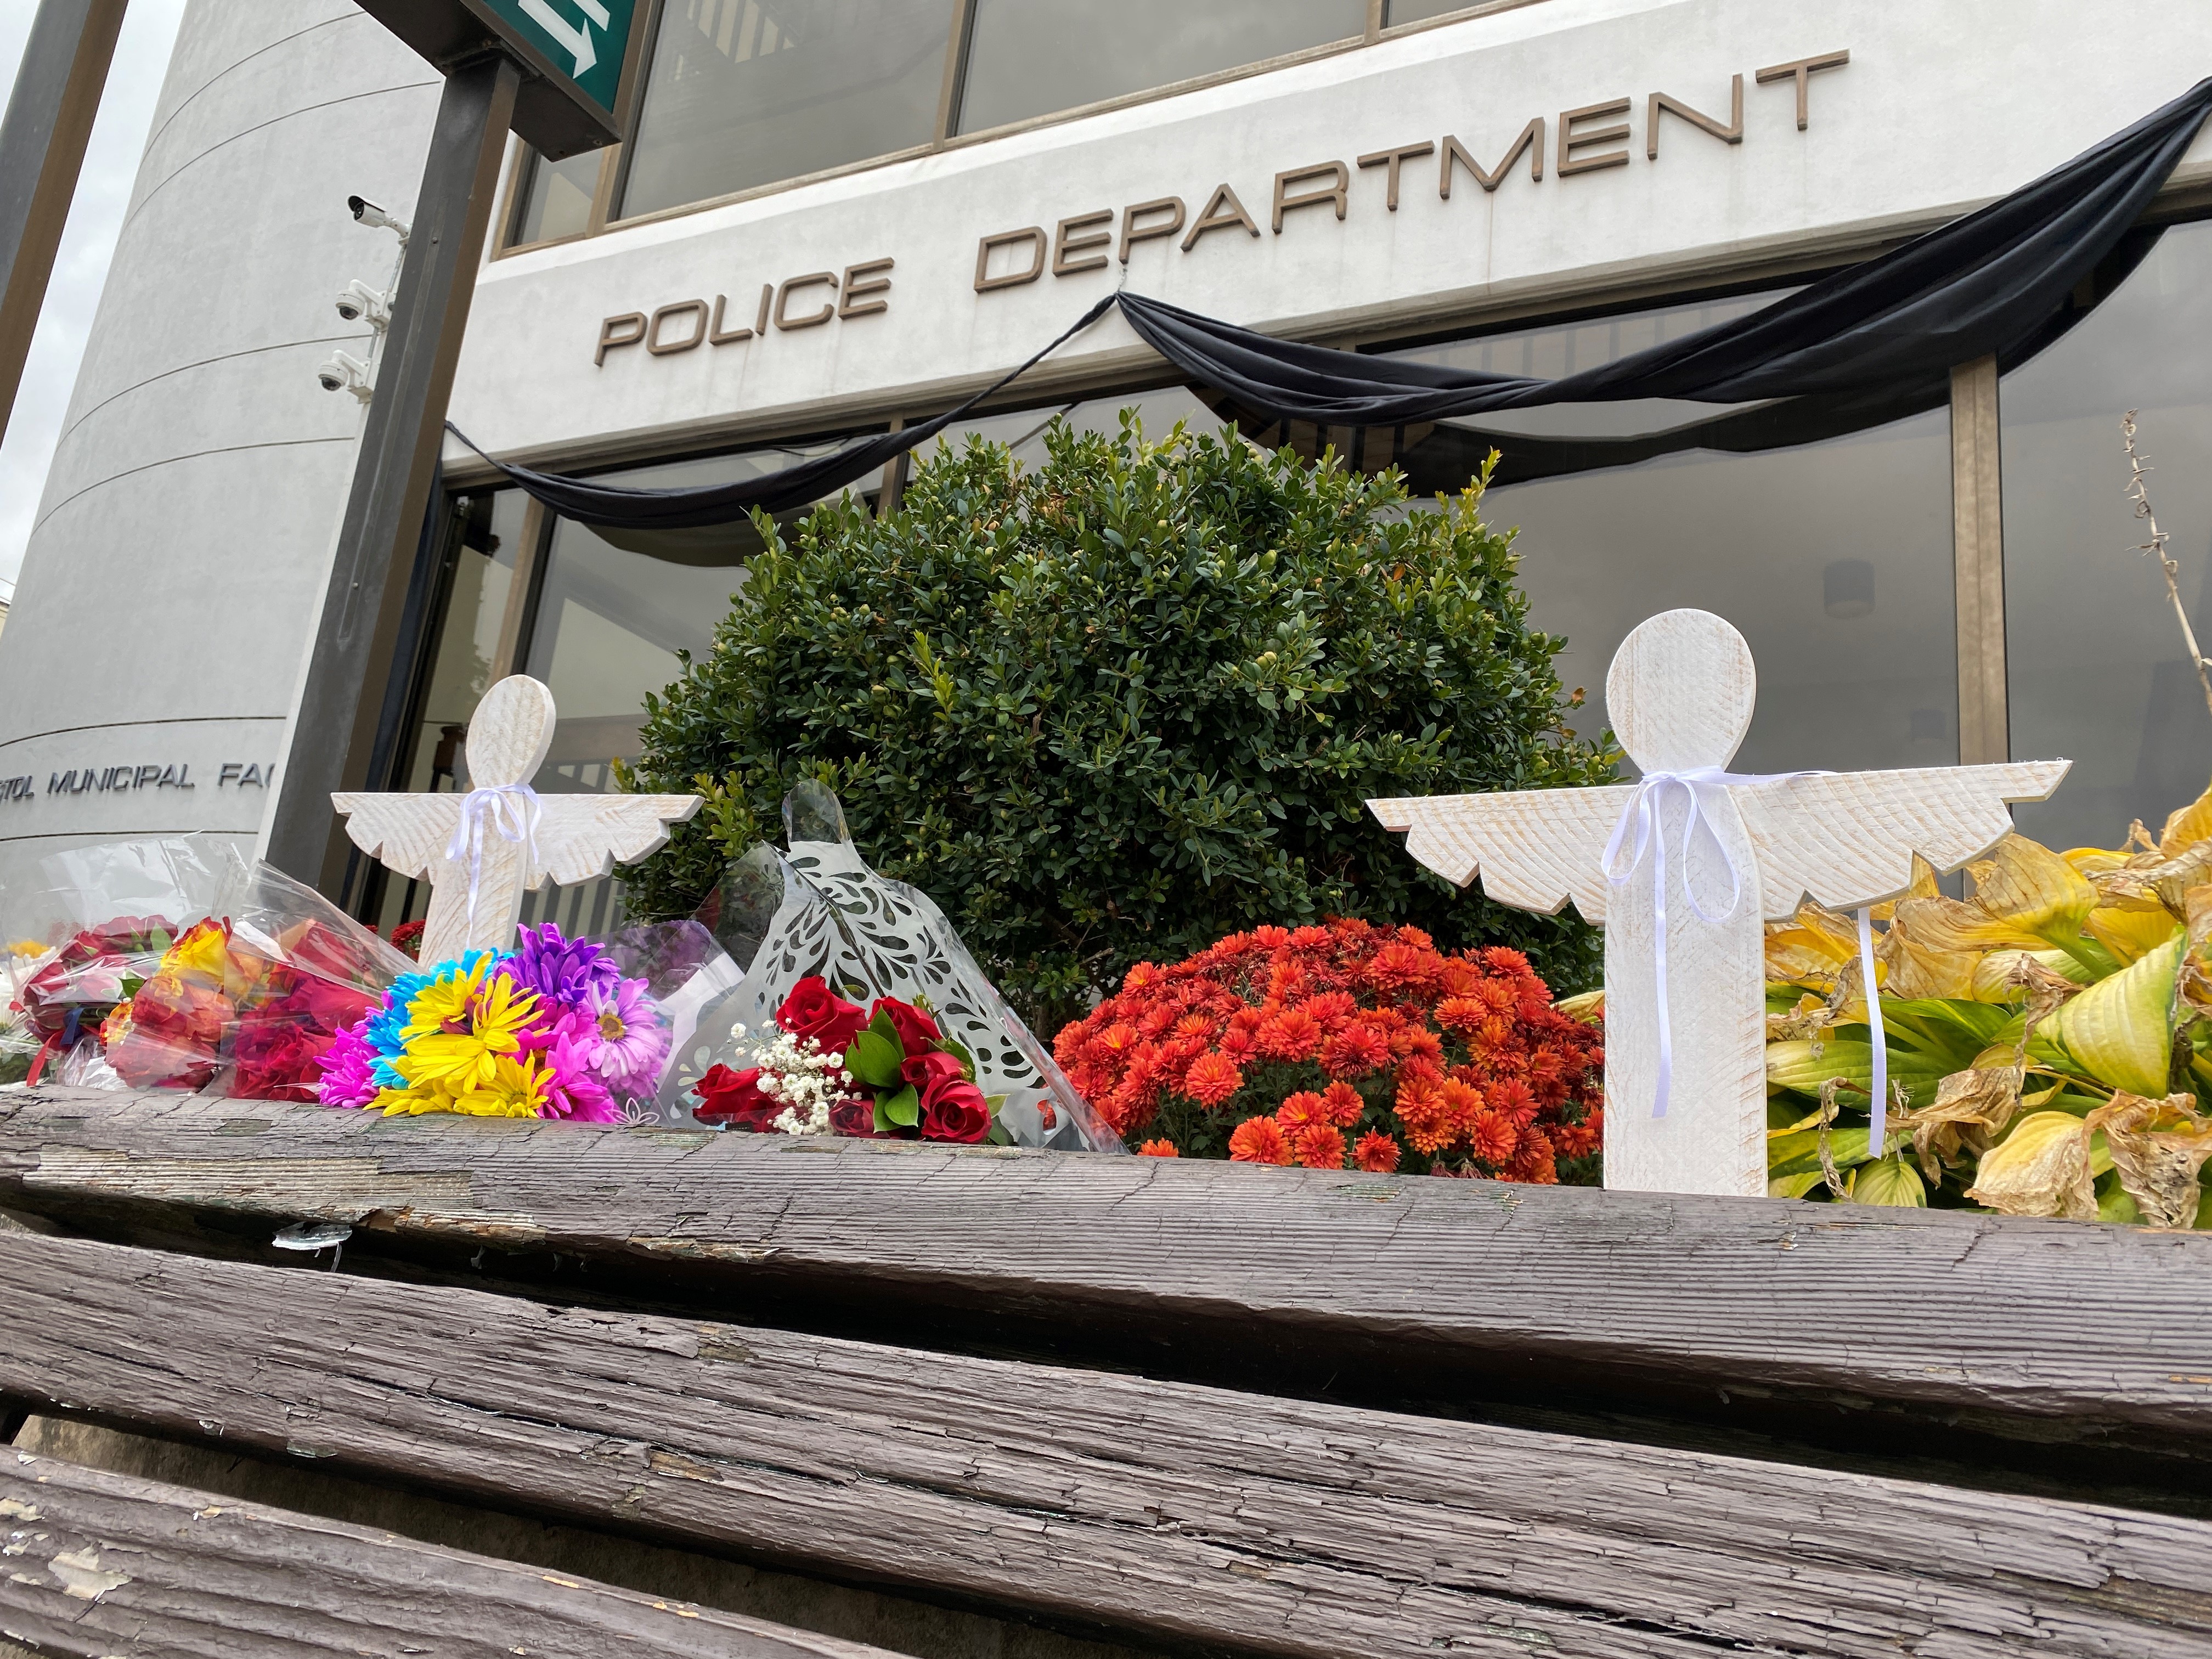 CT Halloween Attraction Displays a Murdered Police Officer – NBC Connecticut